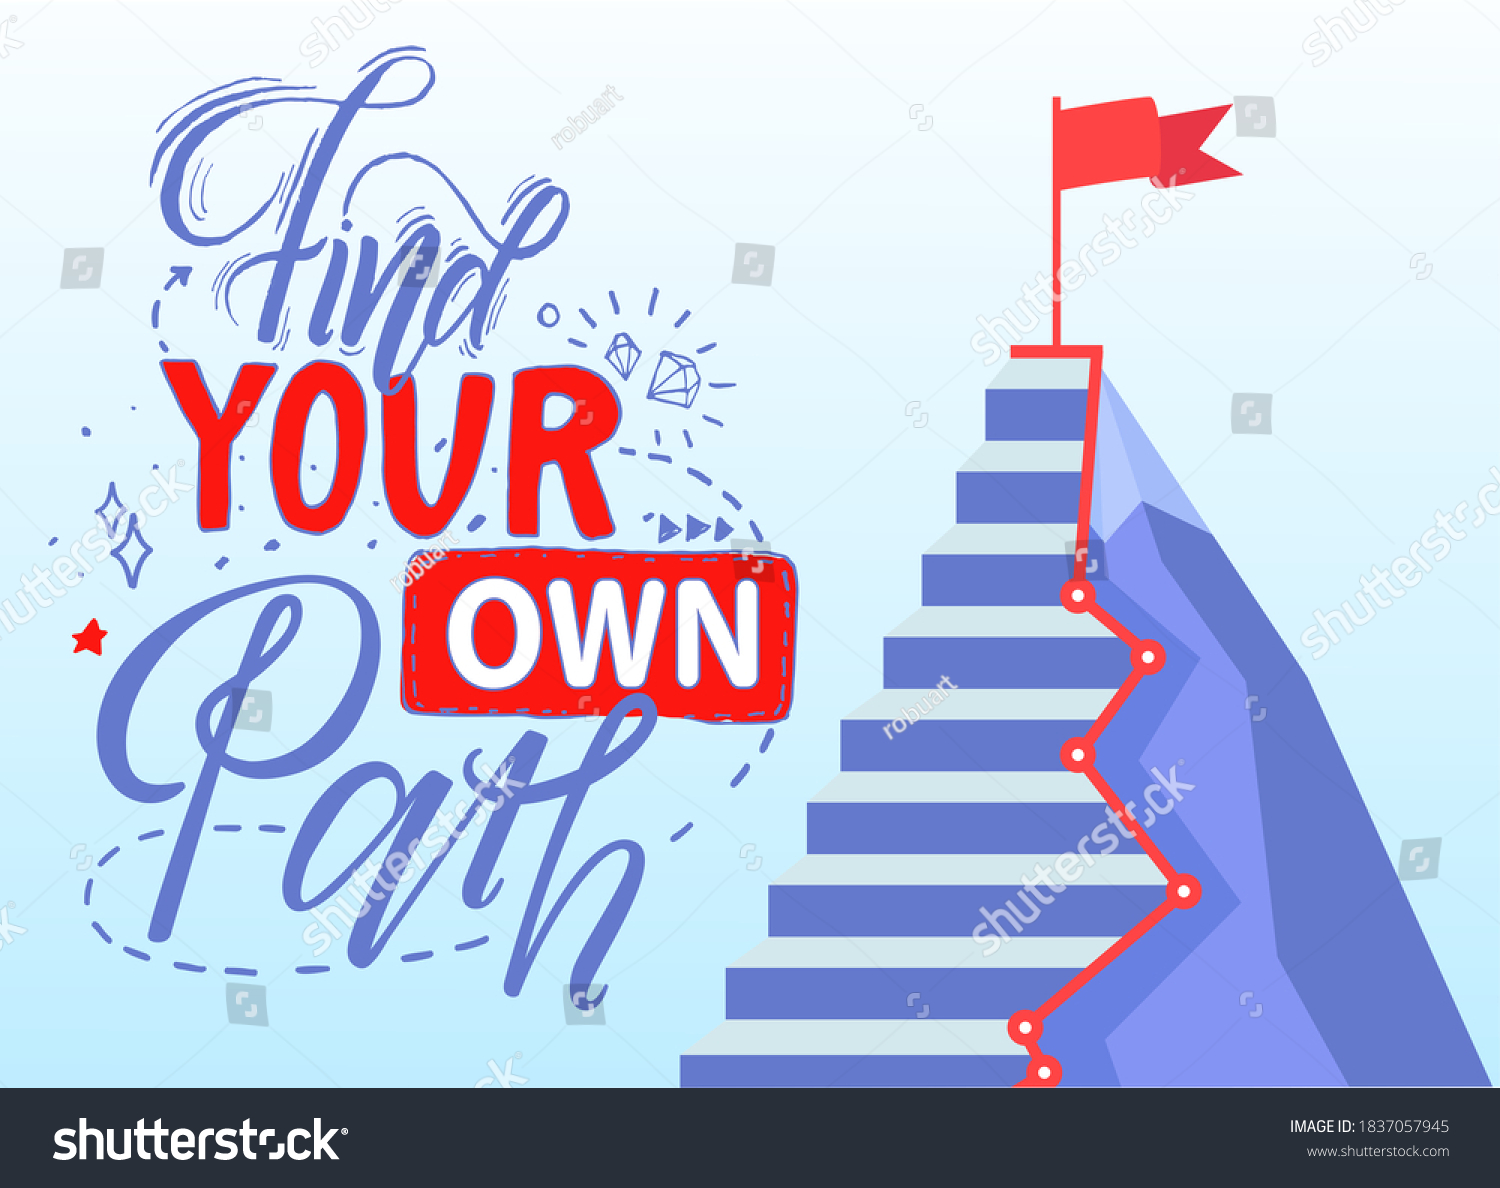 Find Your Own Path Slogan Achieve Stock Vector (Royalty Free) 1837057945